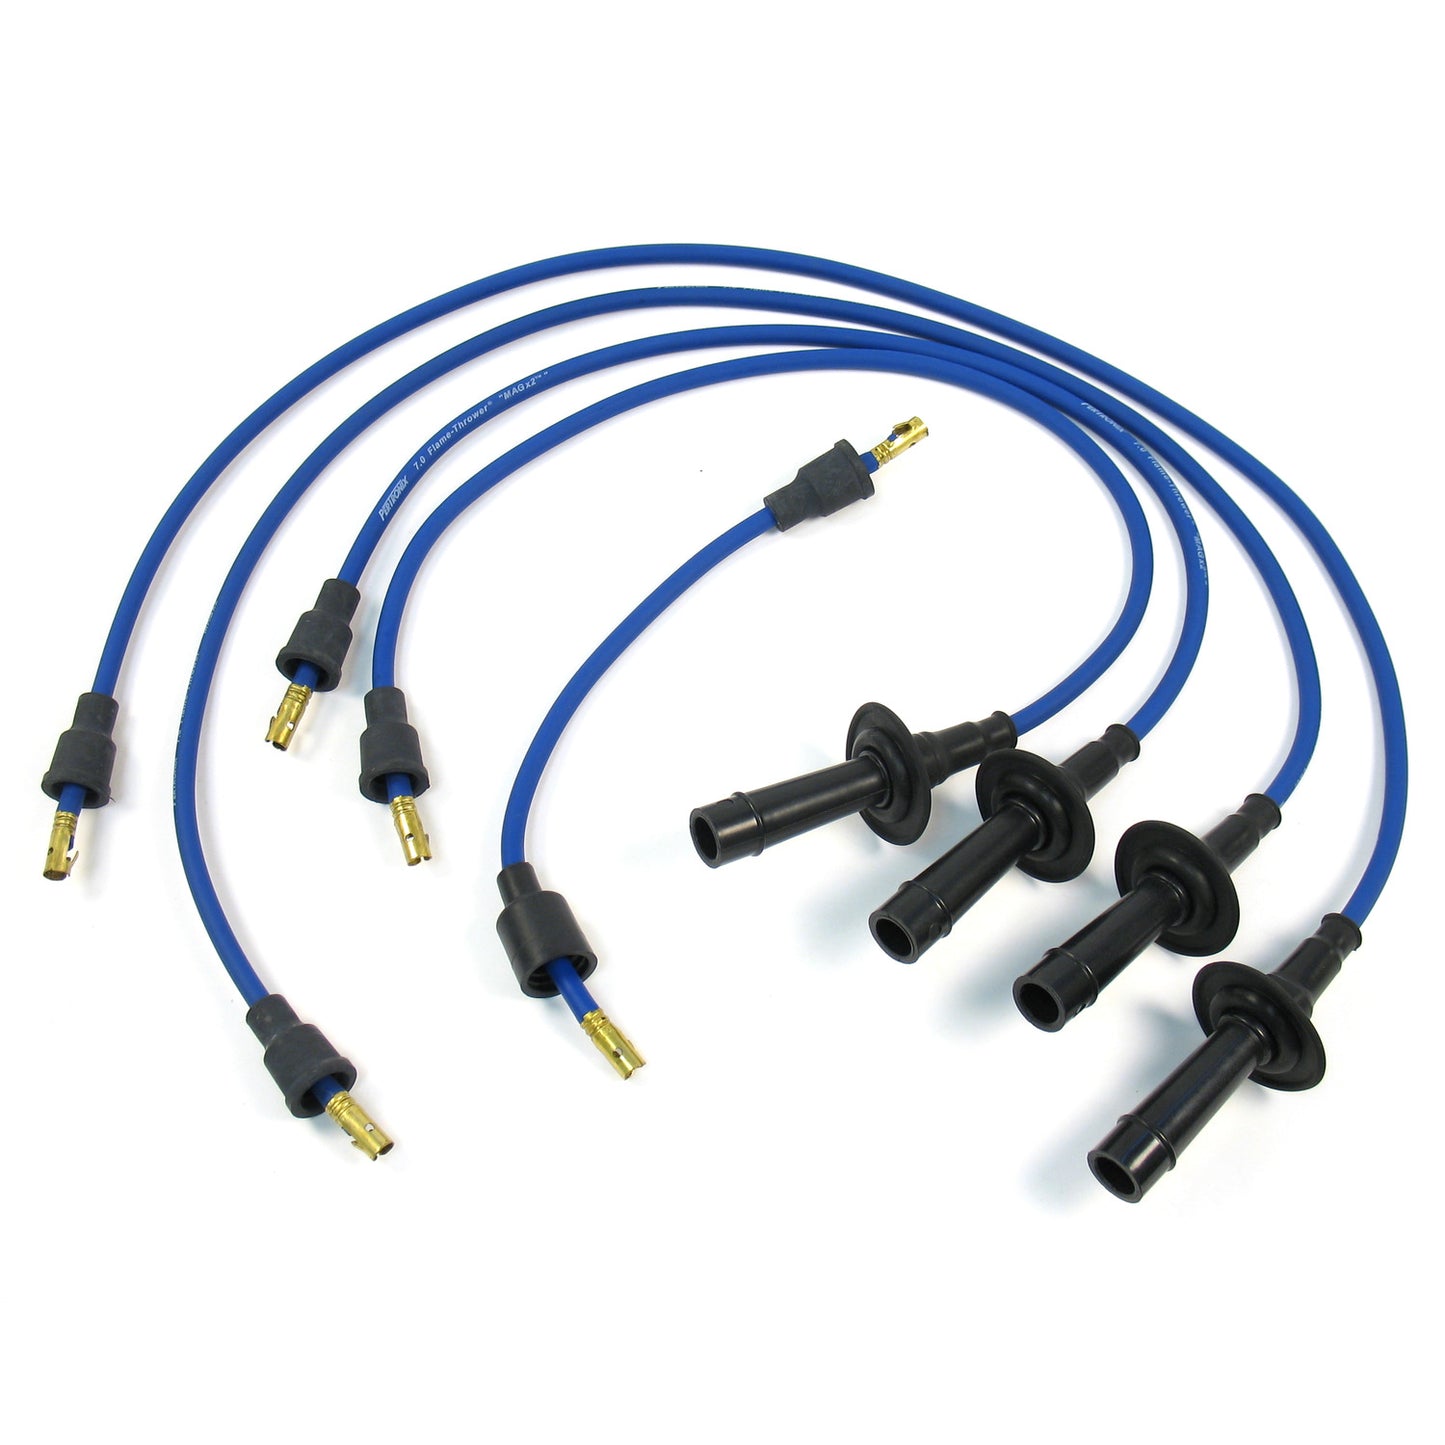 PerTronix 704301 Flame-Thrower Spark Plug Wires 4 cyl VW Custom Fit Blue